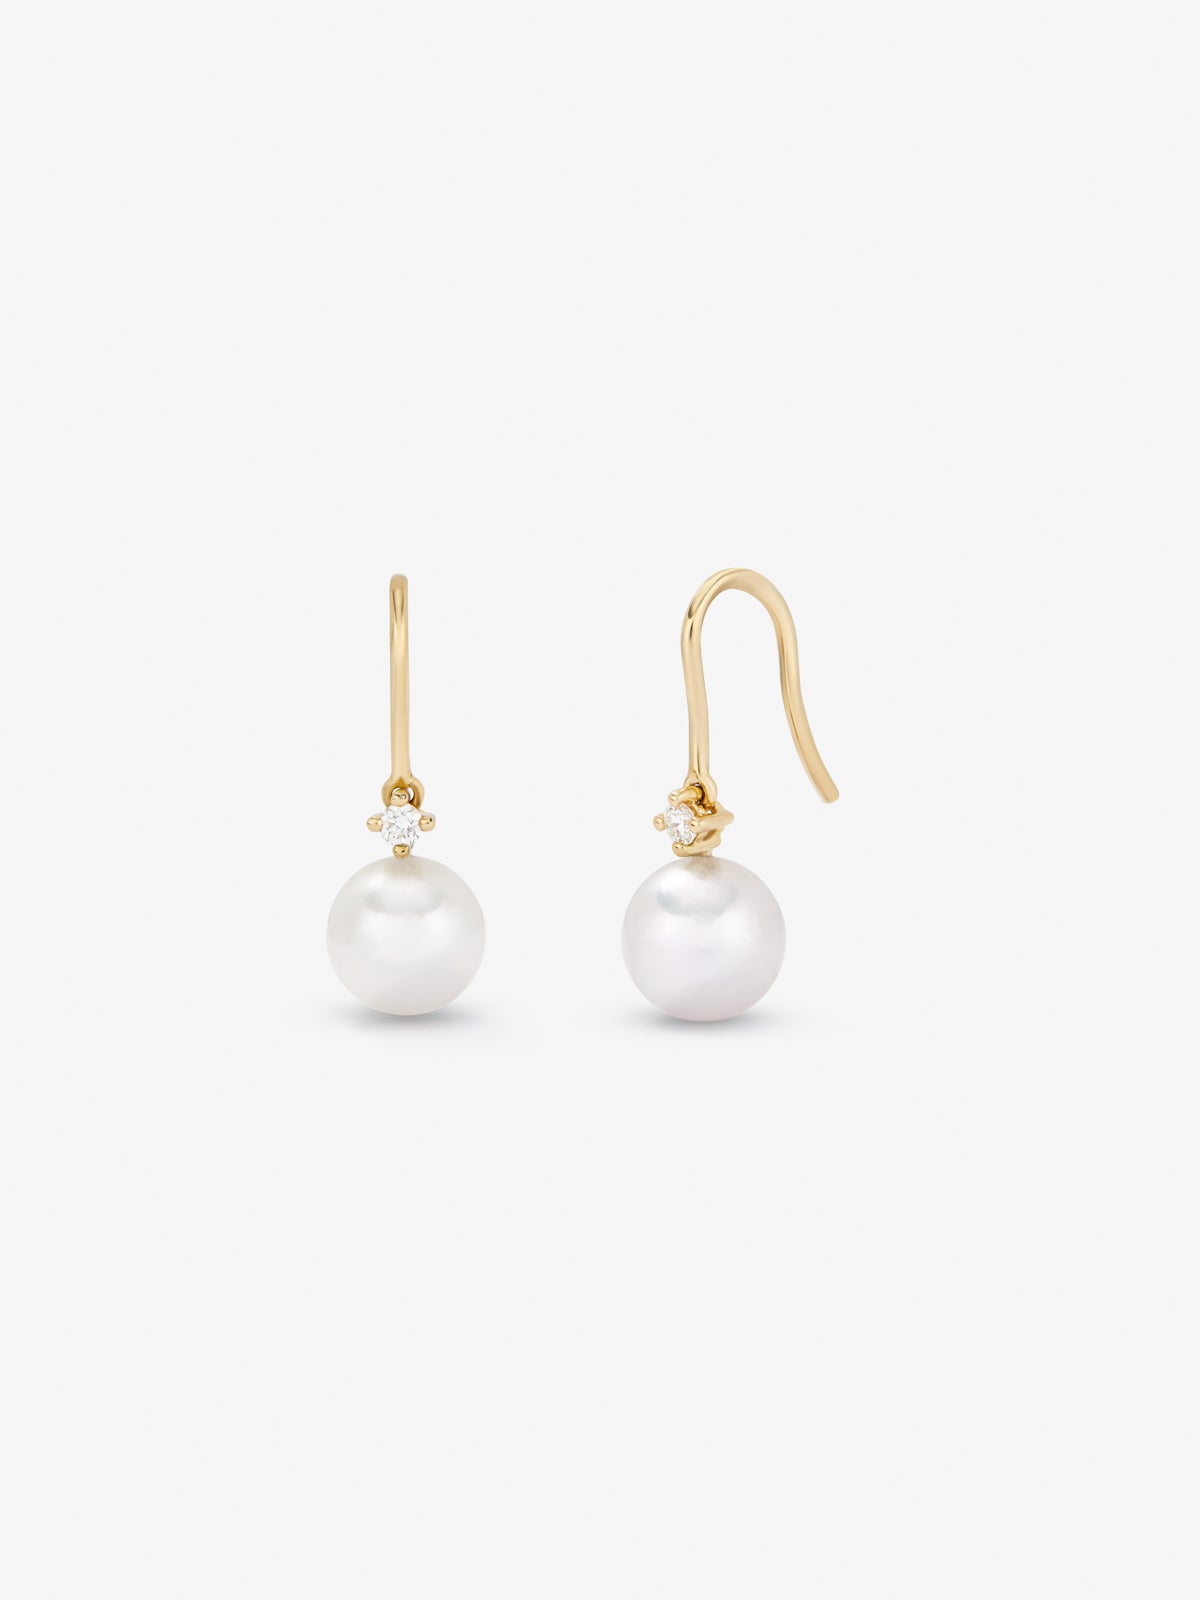 18k yellow gold pendant earring with 8mm akoya pearl and diamond.